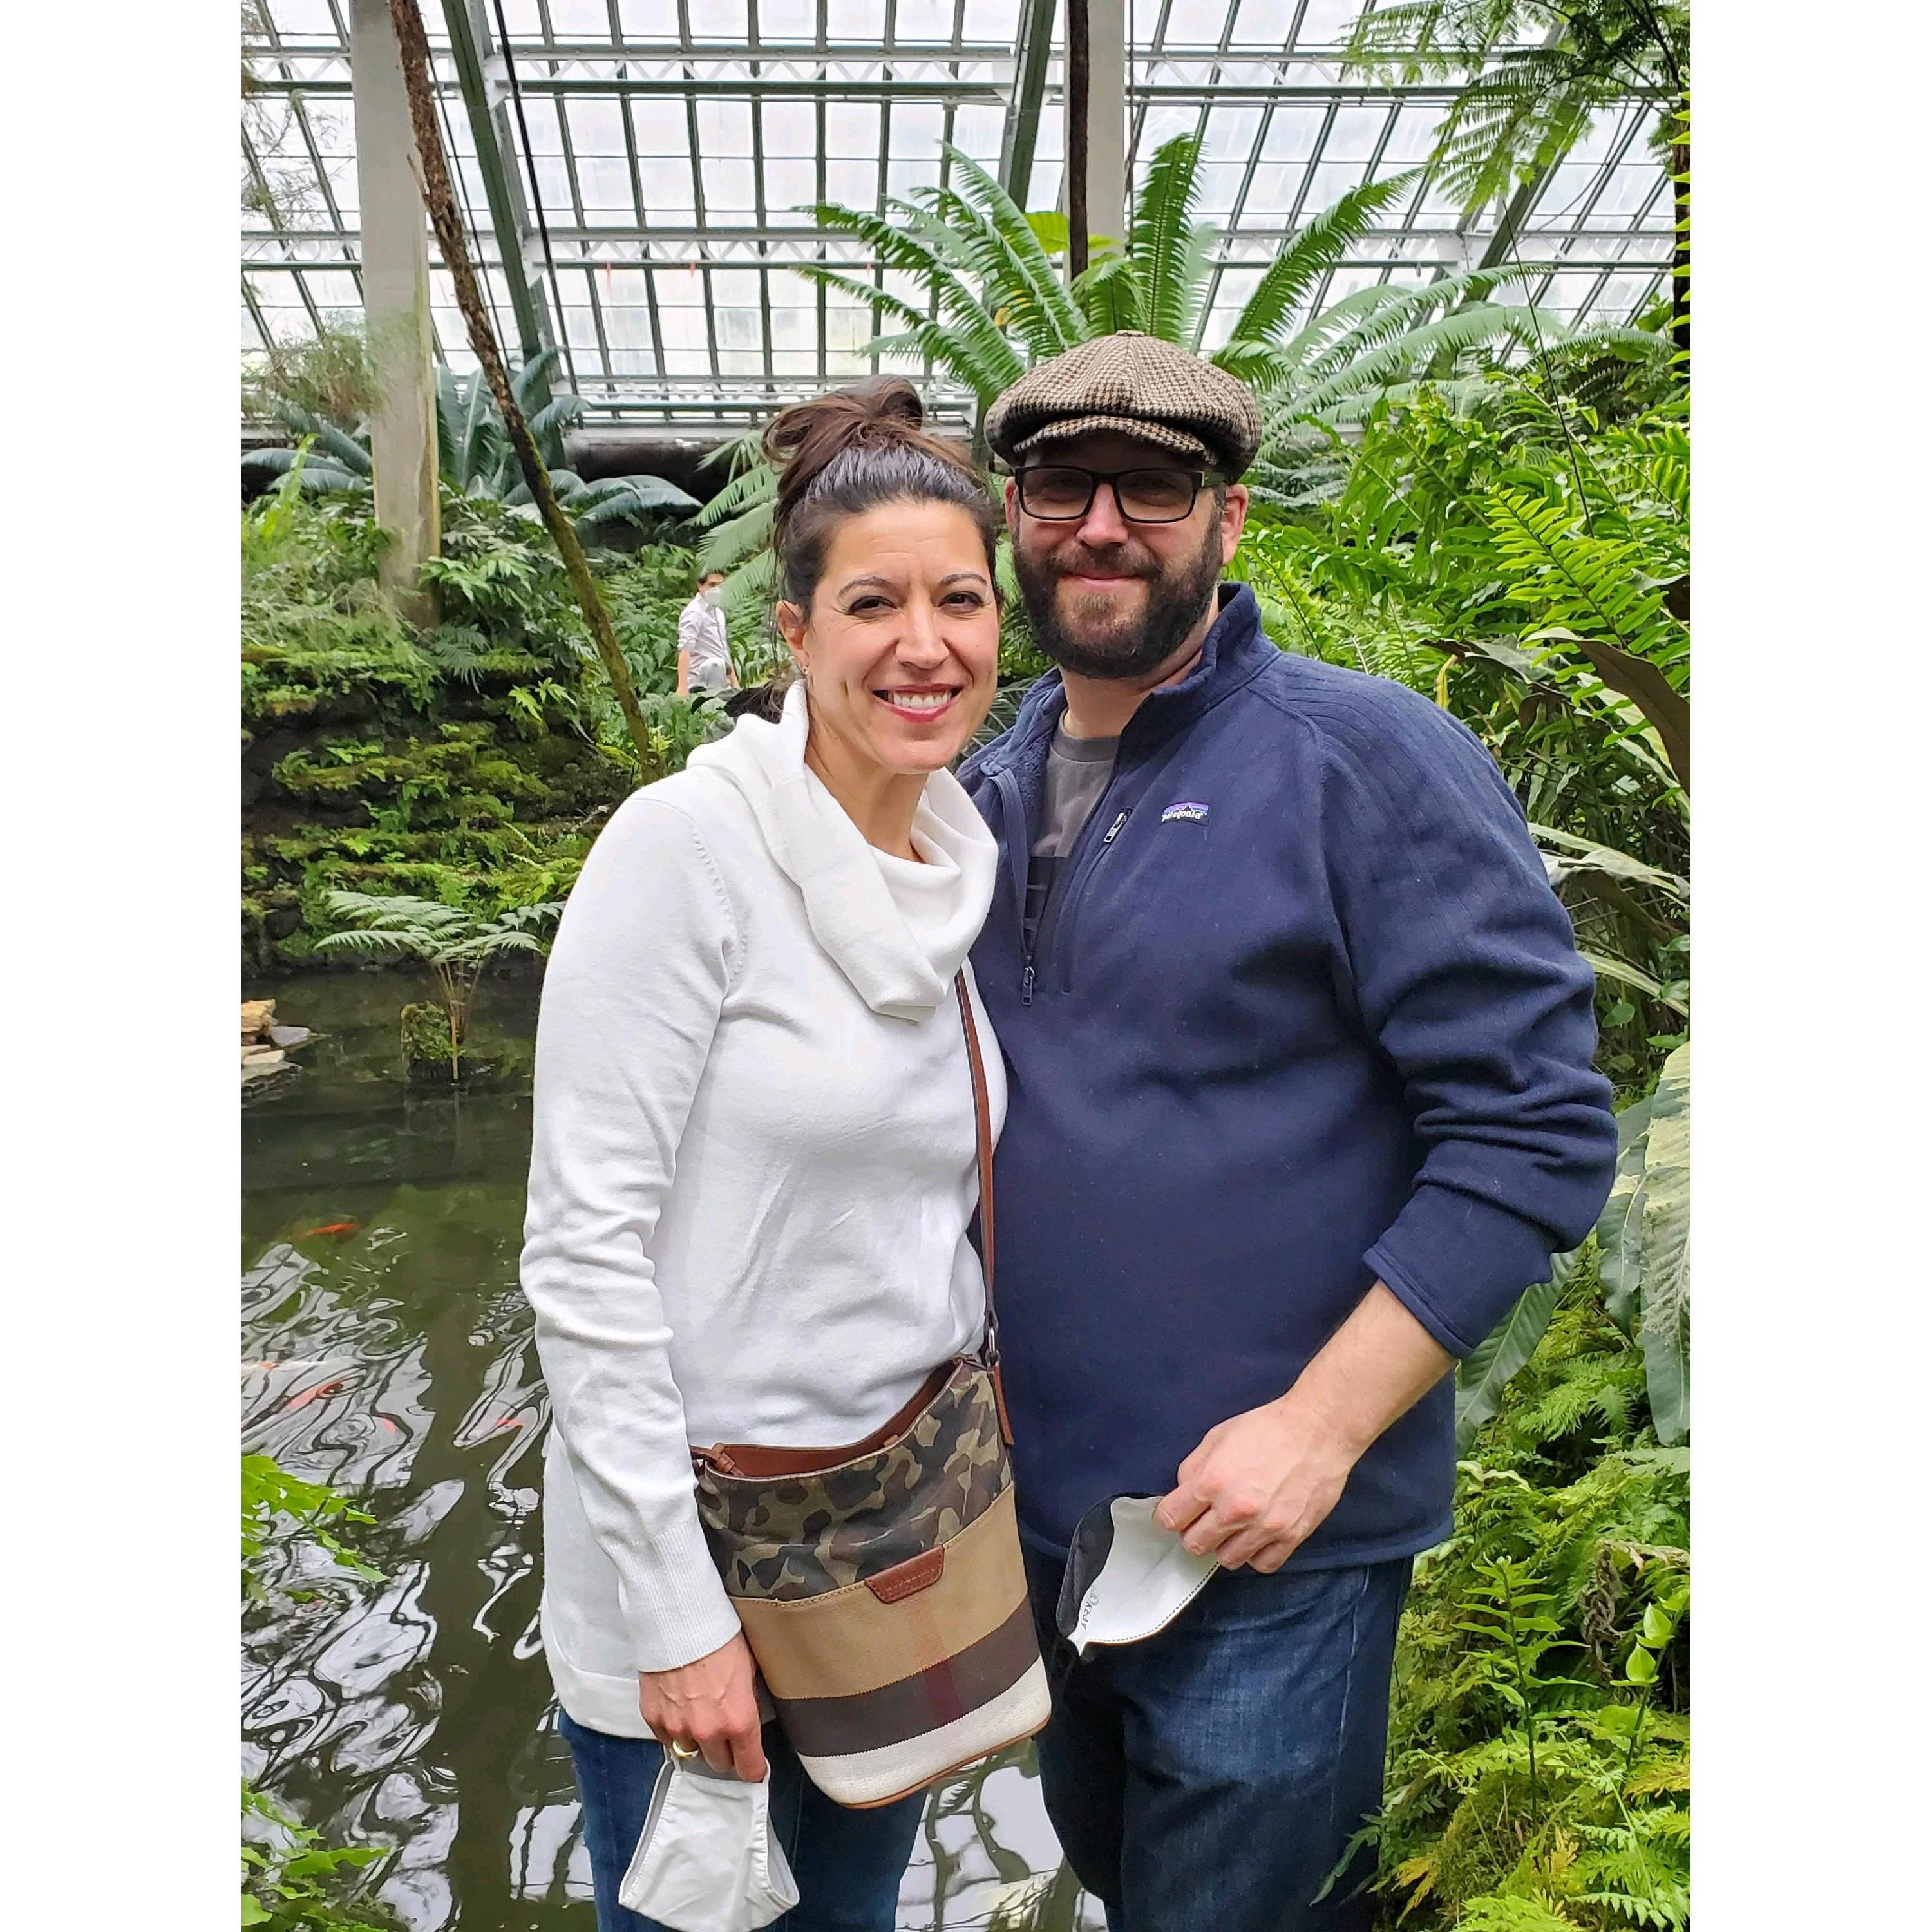 Weekend outing at Garfield Park Conservatory